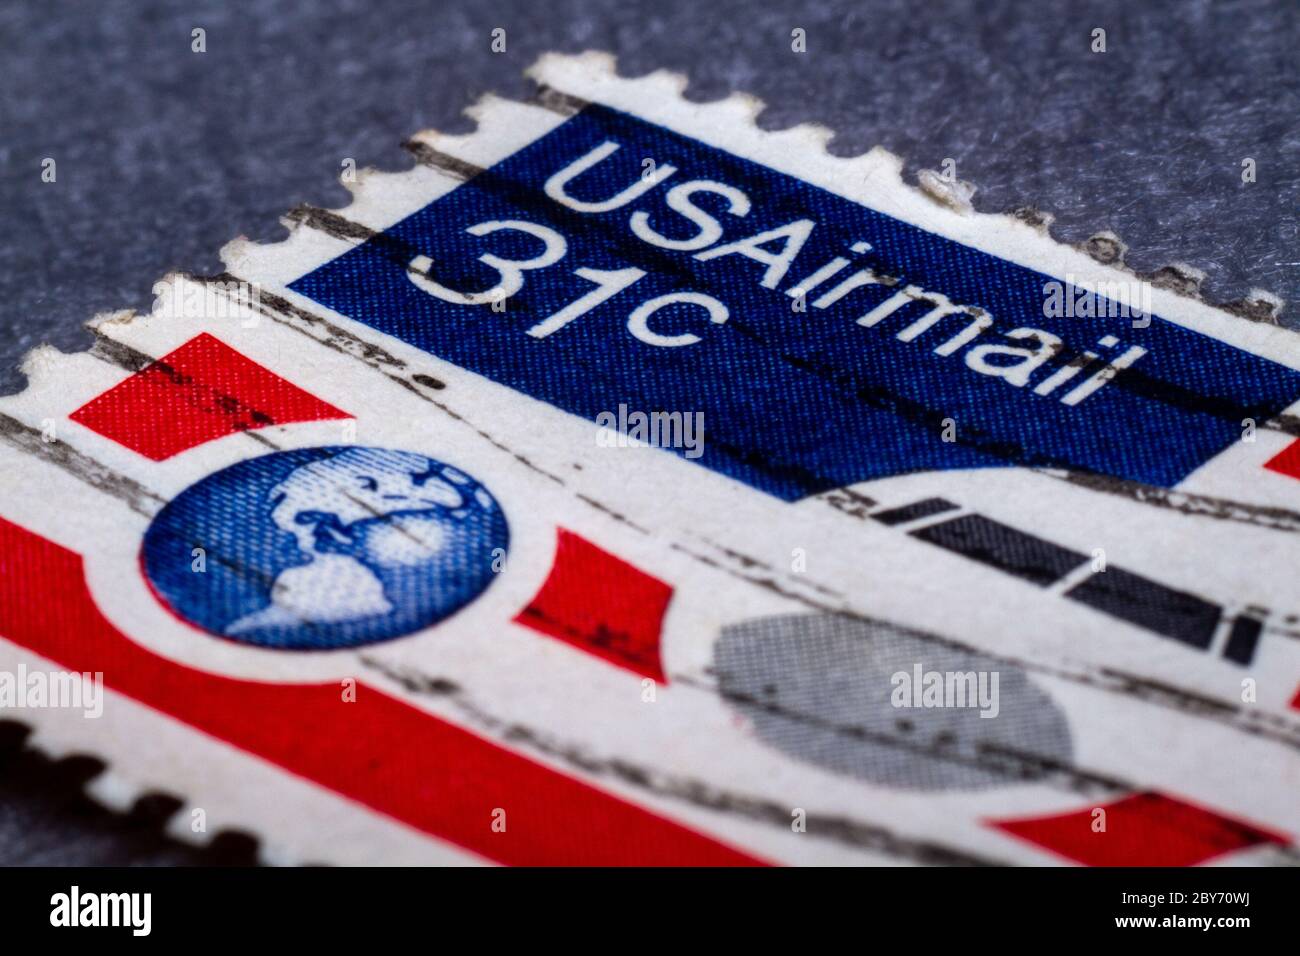 USA airmail stamp close-up picture Stock Photo